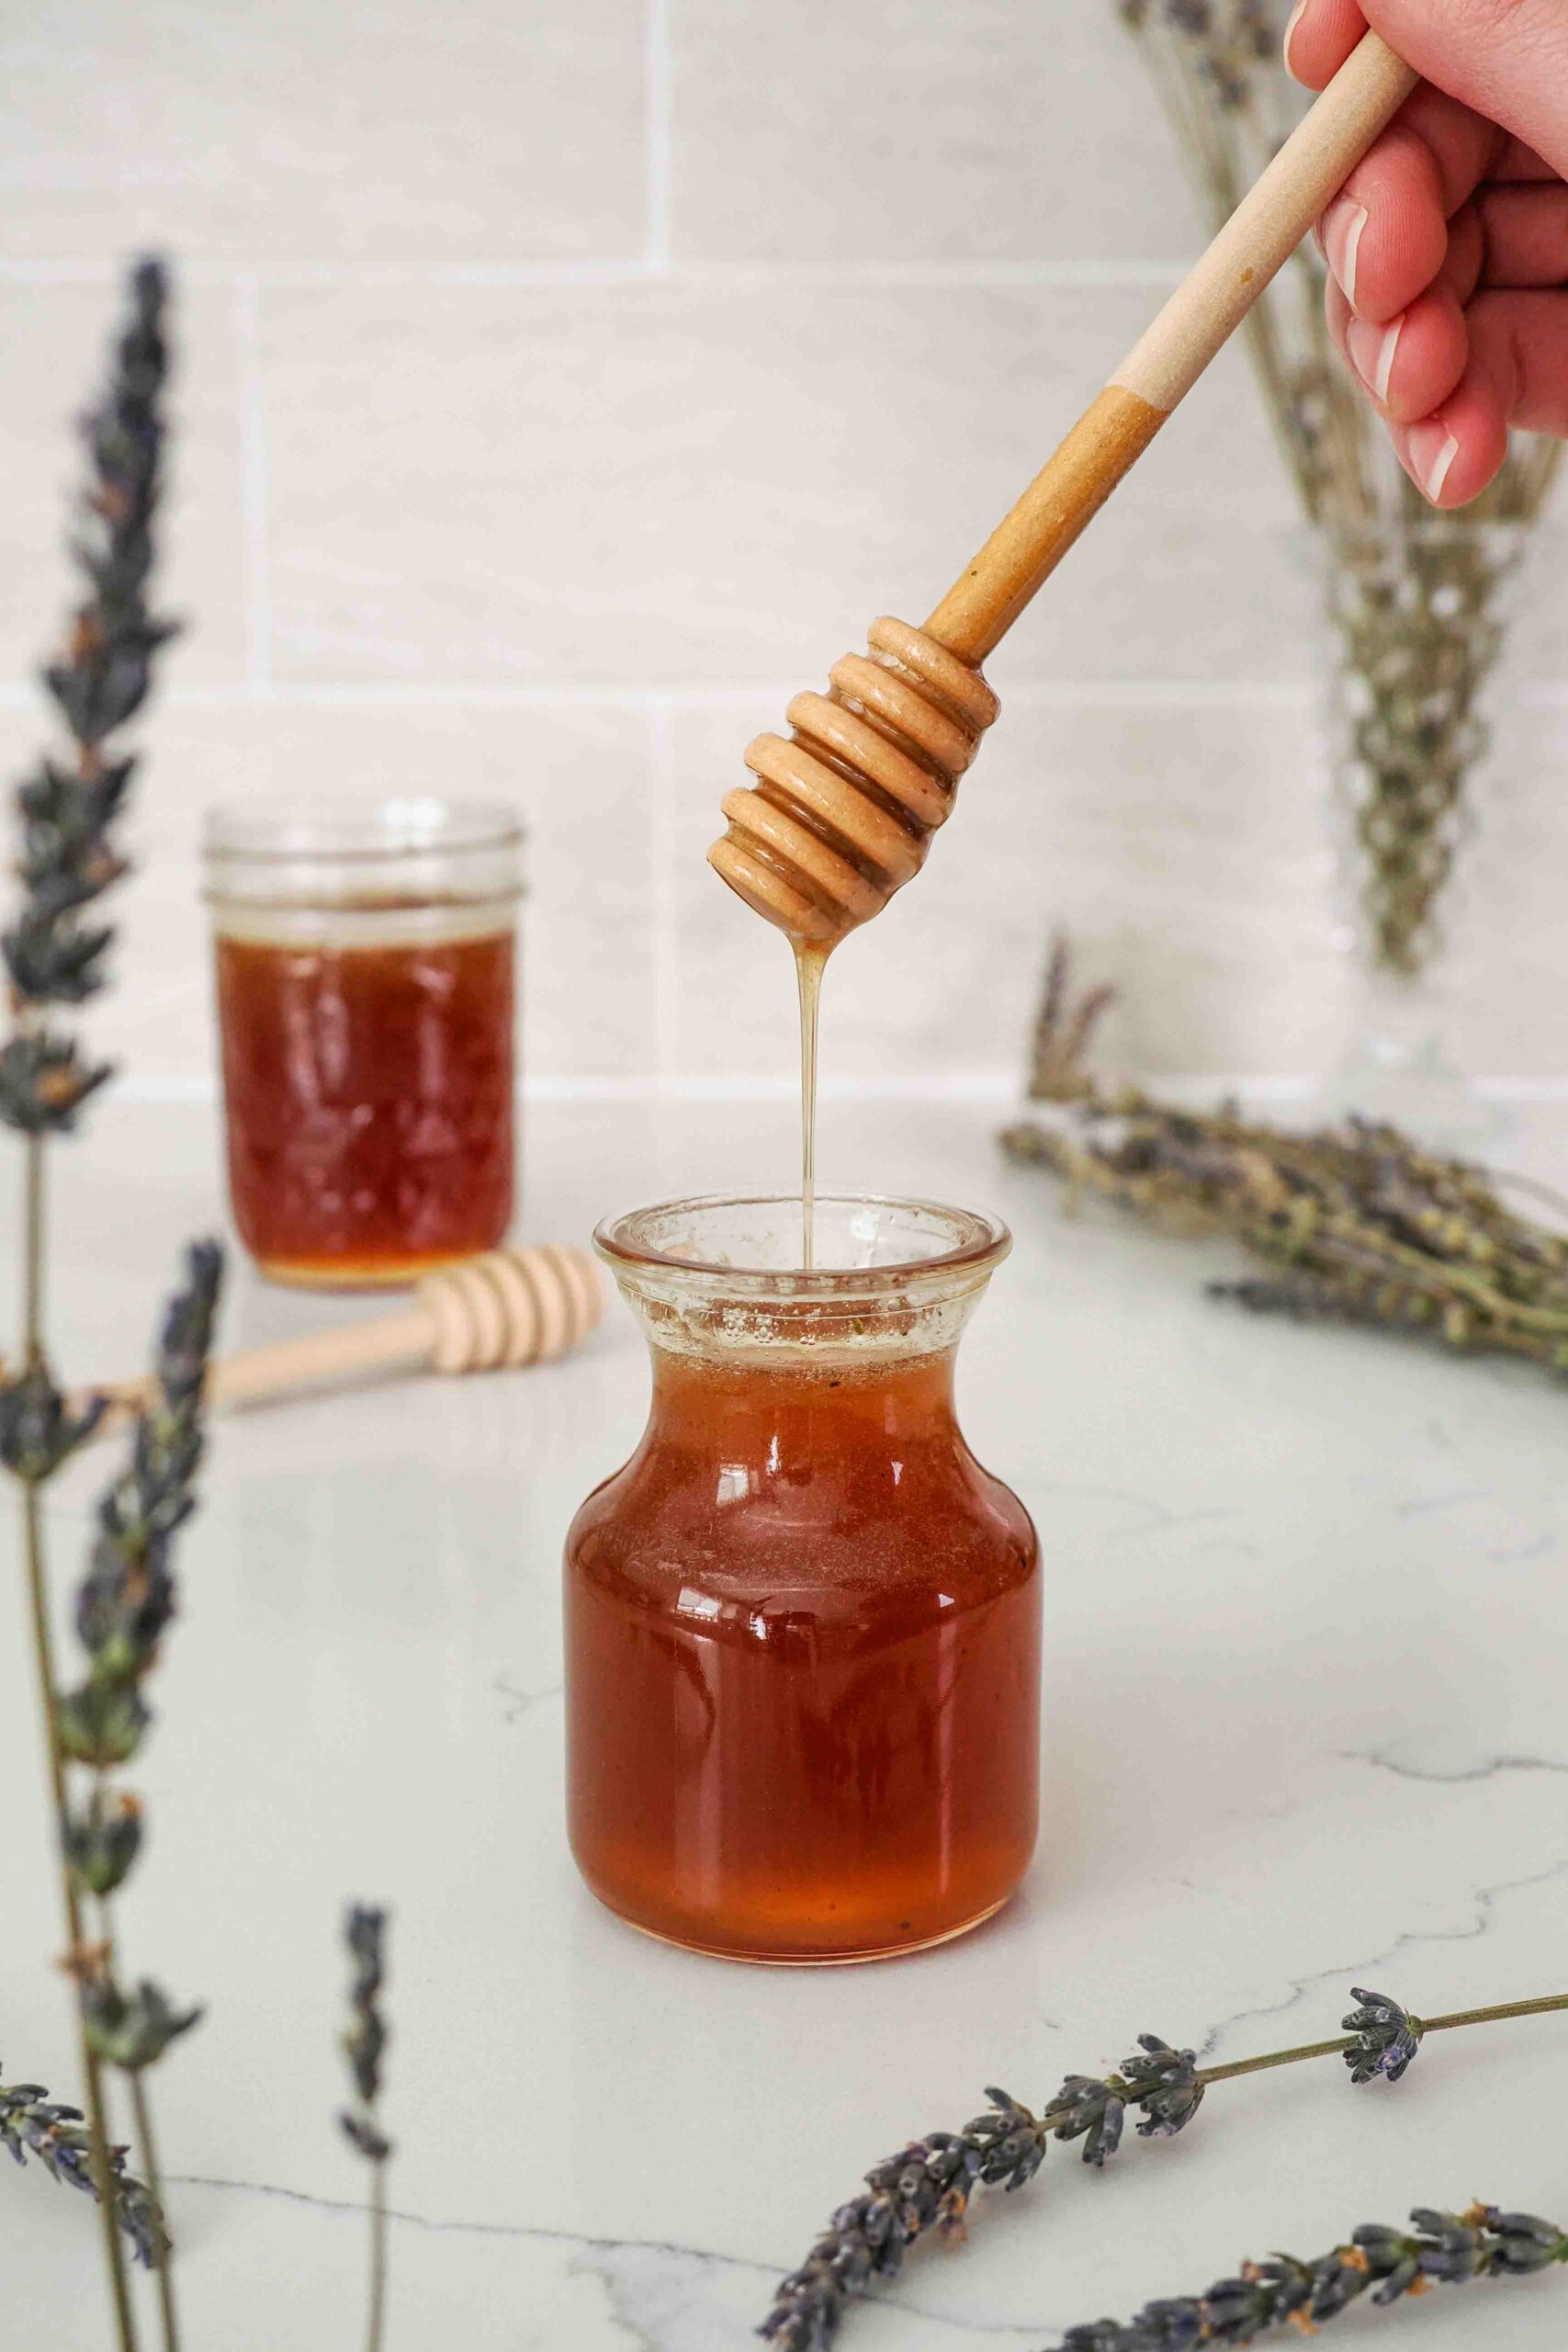 Honey lavender syrup drips off a honey dipper into a jar.